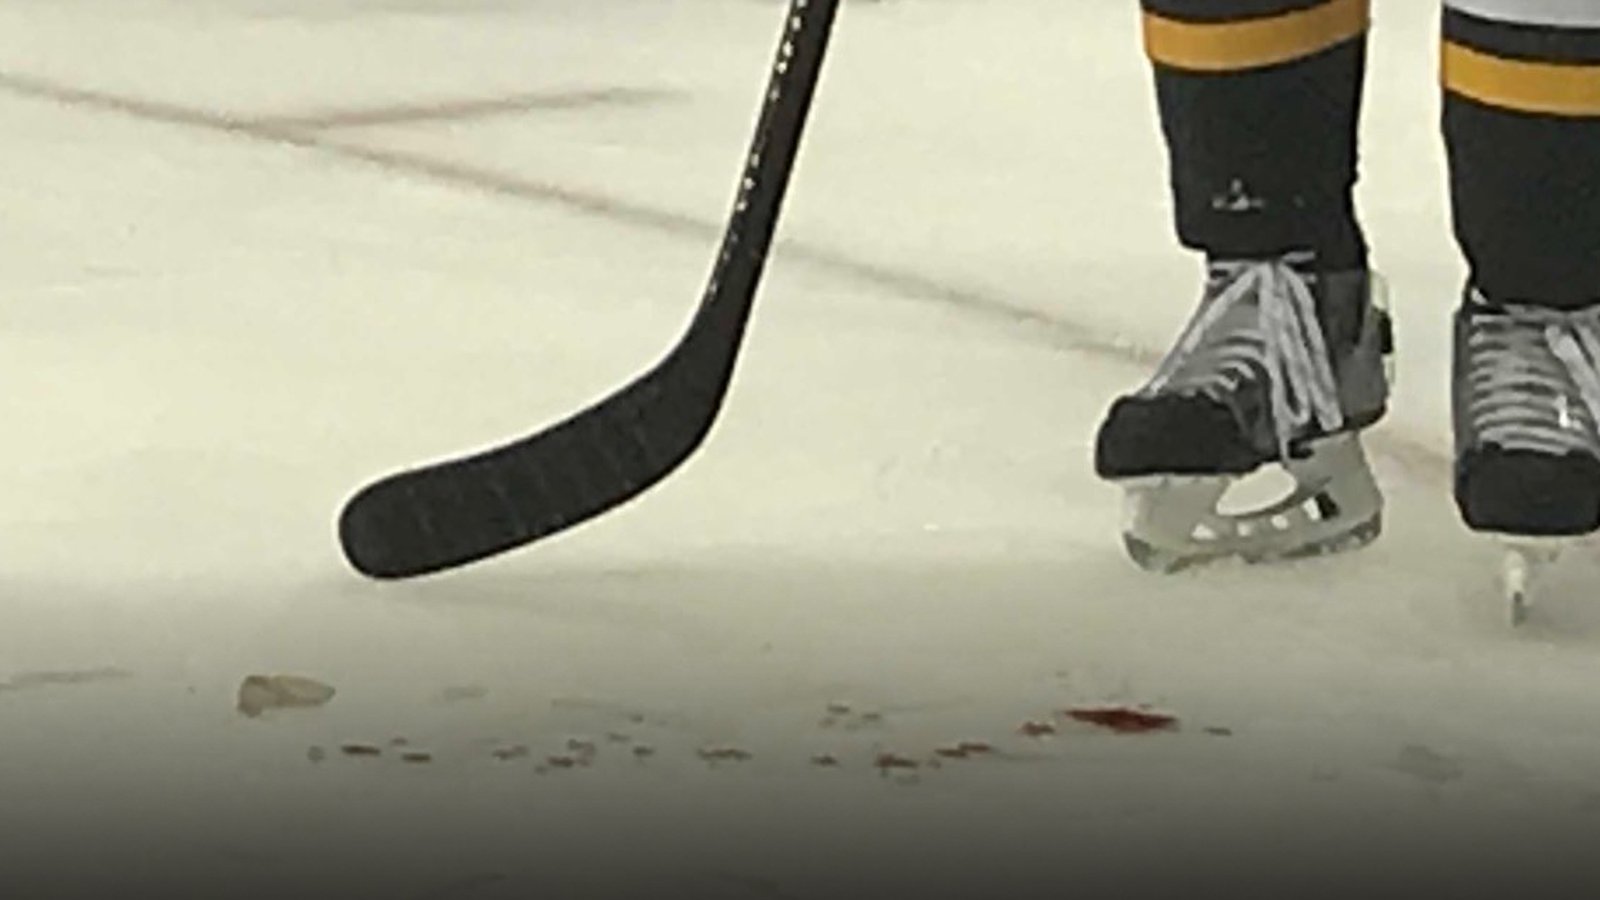 Must see: Gruesome injury leaves bloody mess on ice